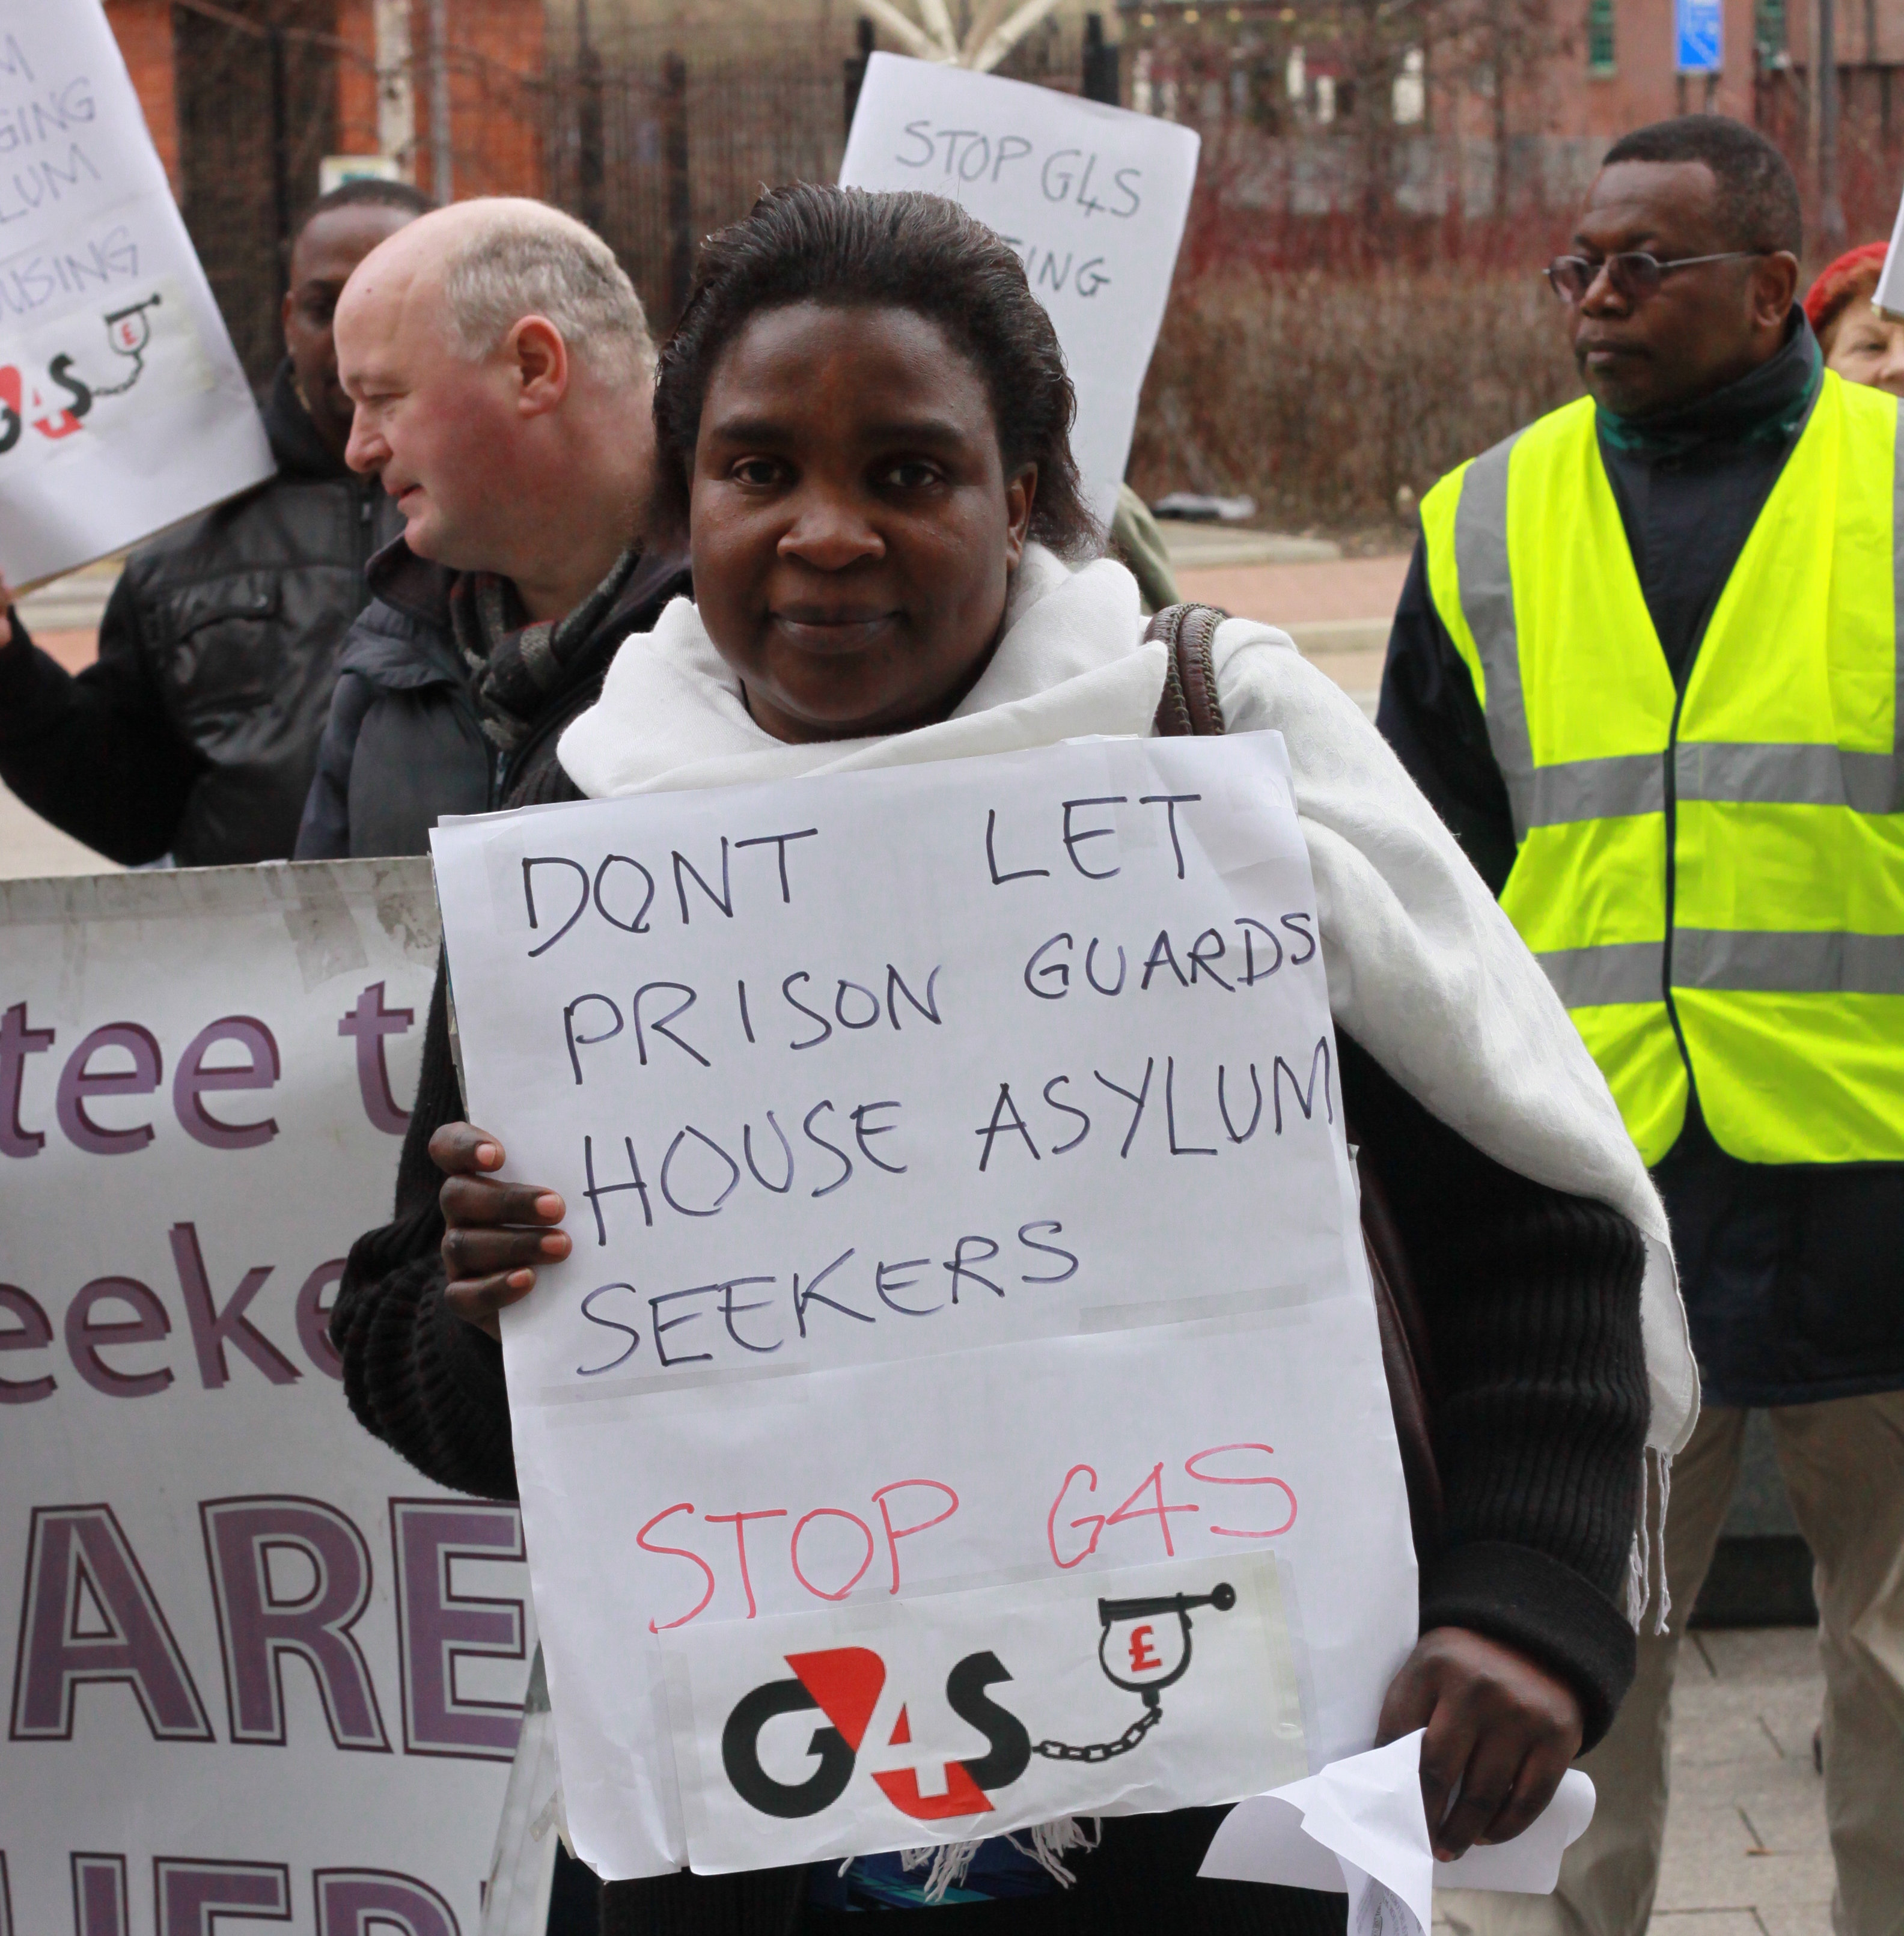 Leeds Council Order G4S to Review All Asylum Housing